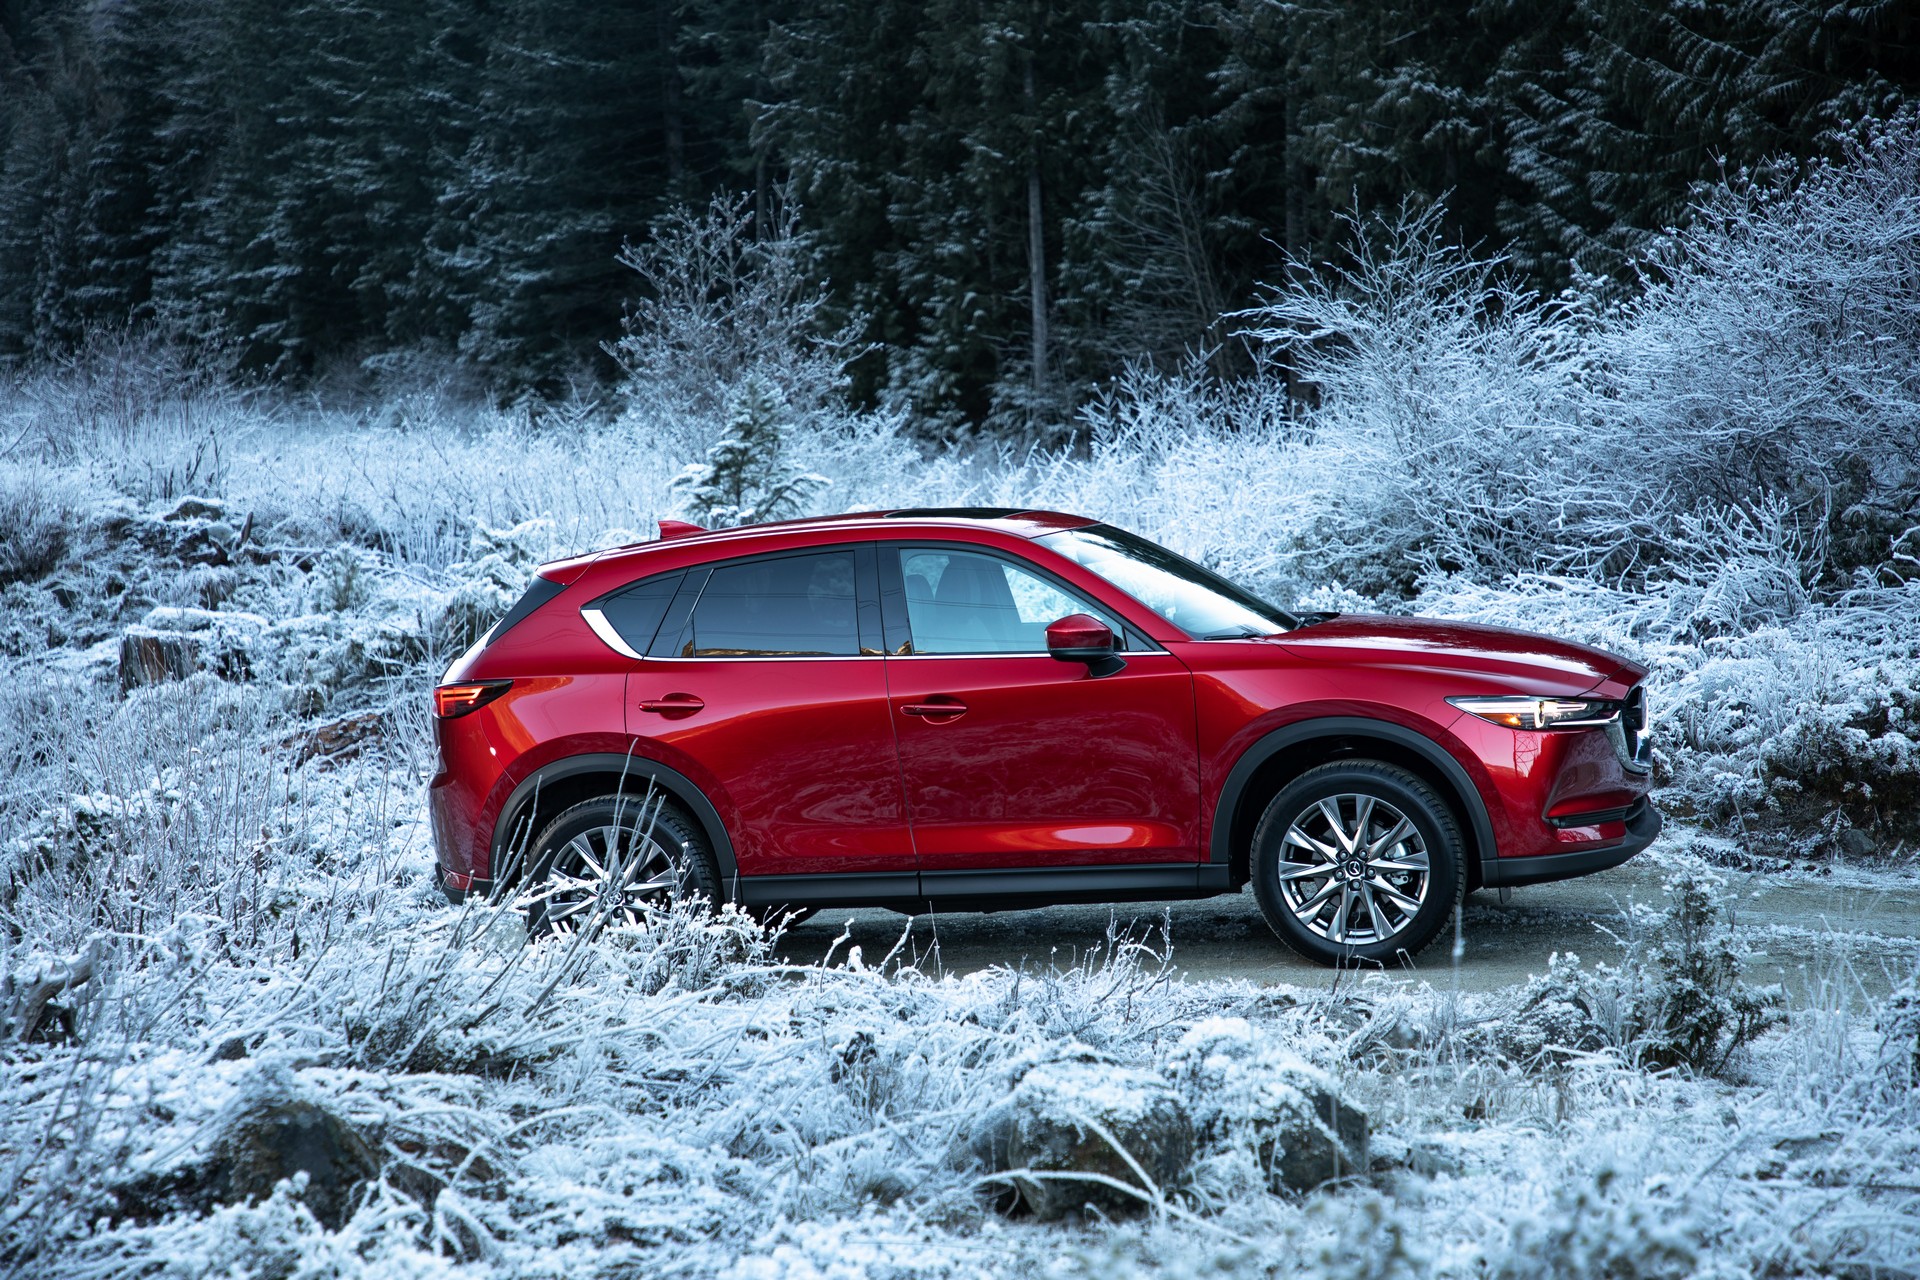 2020 Mazda Cx 5 Gains More Power And Equipment But Prices Jump By